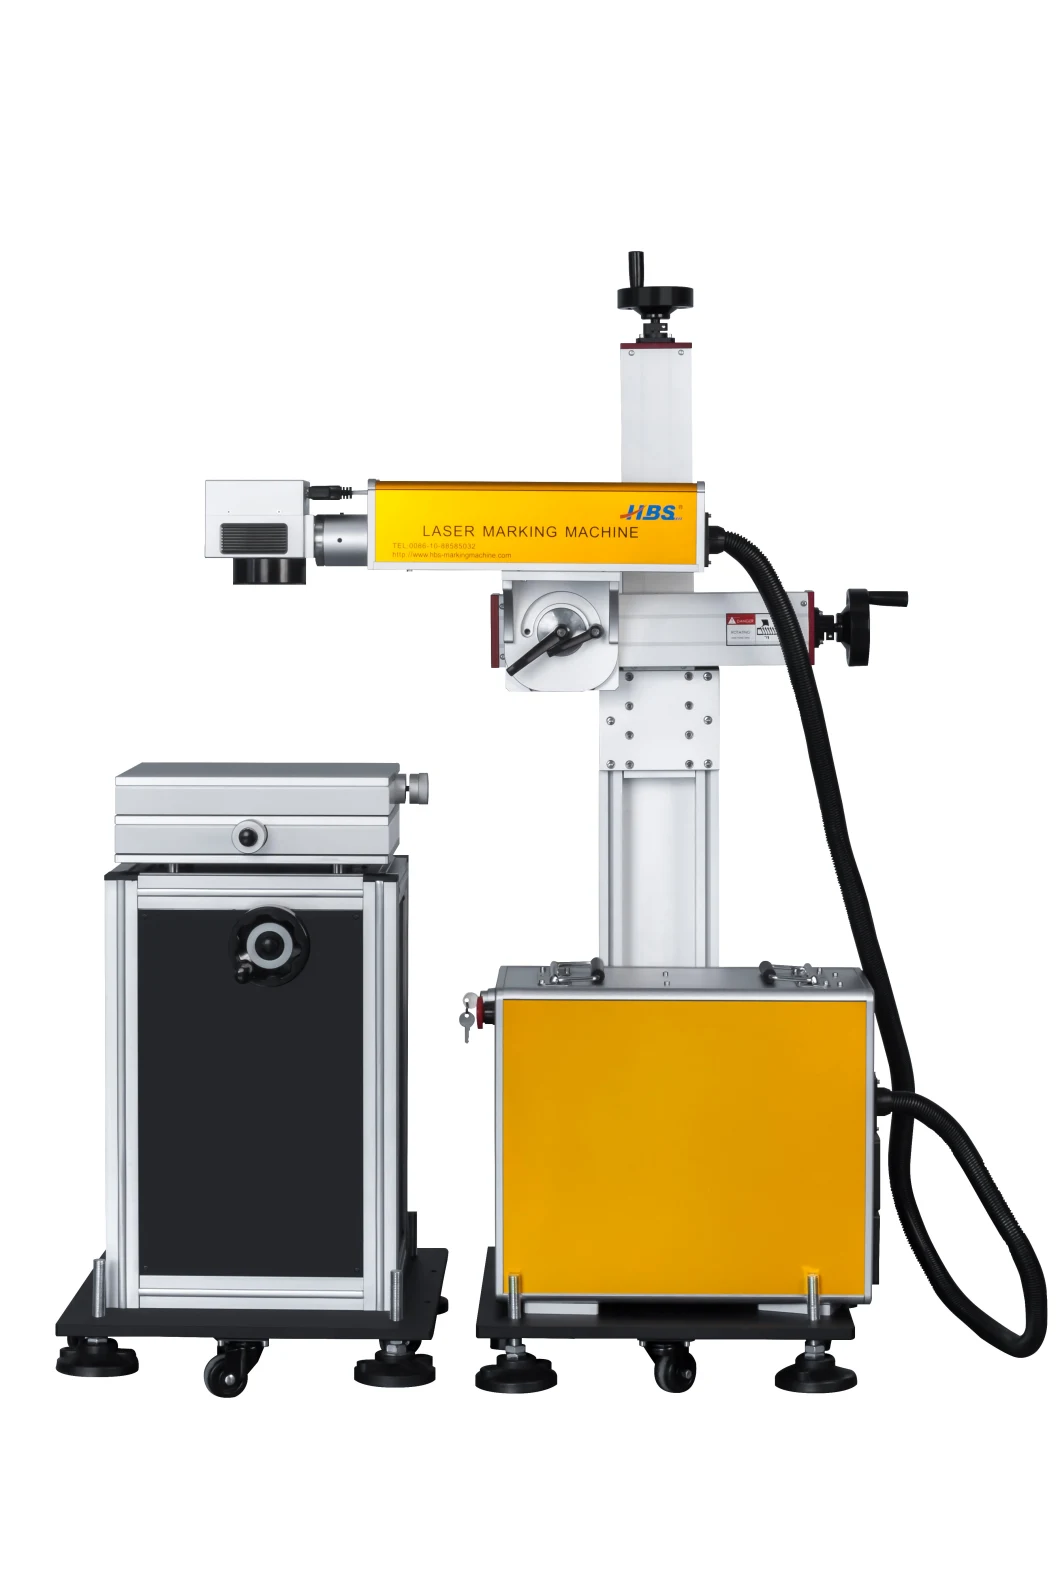 High Speed Online Flying Fiber Laser Marking Machine for PVC Pipes, Metals and Plastic Materials